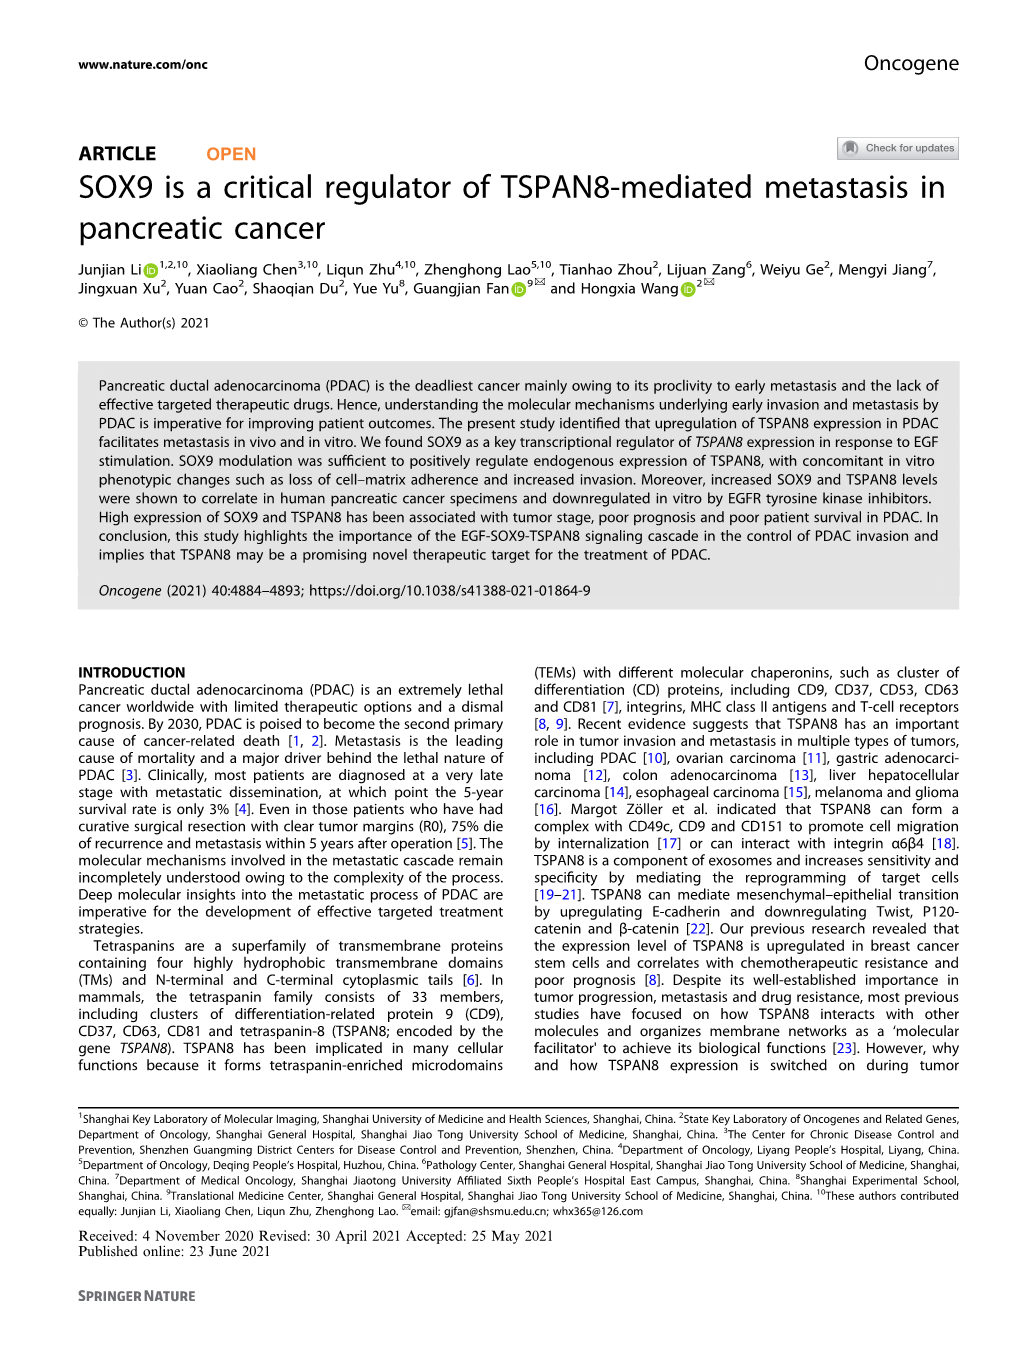 SOX9 Is a Critical Regulator of TSPAN8-Mediated Metastasis in Pancreatic Cancer